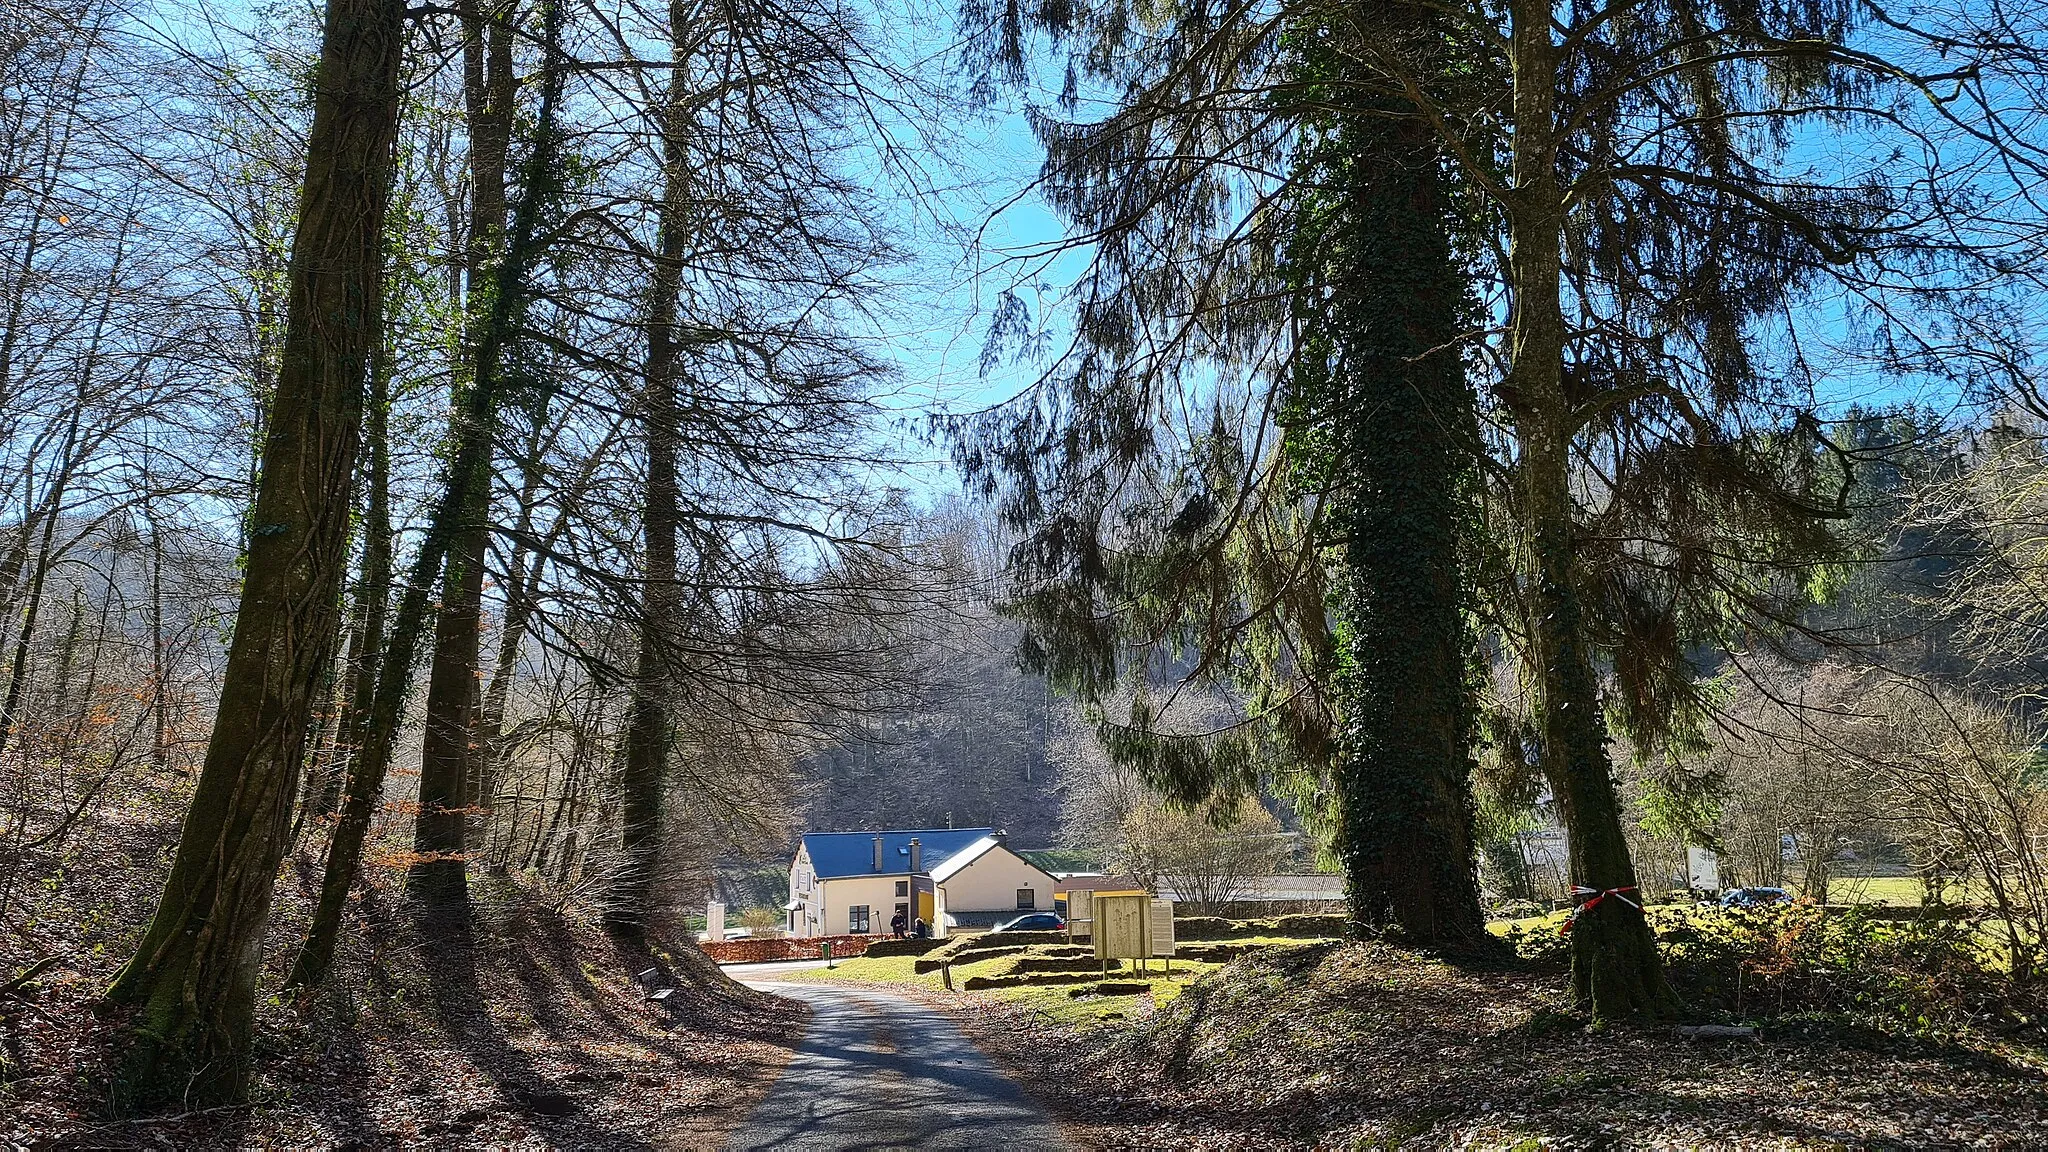 Photo showing: The Gallo-Roman station of Chameleux near the Belgian city of Florenville is pleasant, peaceful, and is surrounded by an enchanting forest. It was located on the ancient Roman roadway from Reims to Tier. The station existed from Claudian times until early in the 5th century AD, serving as a relay for the Roman soldiers and the travelers.